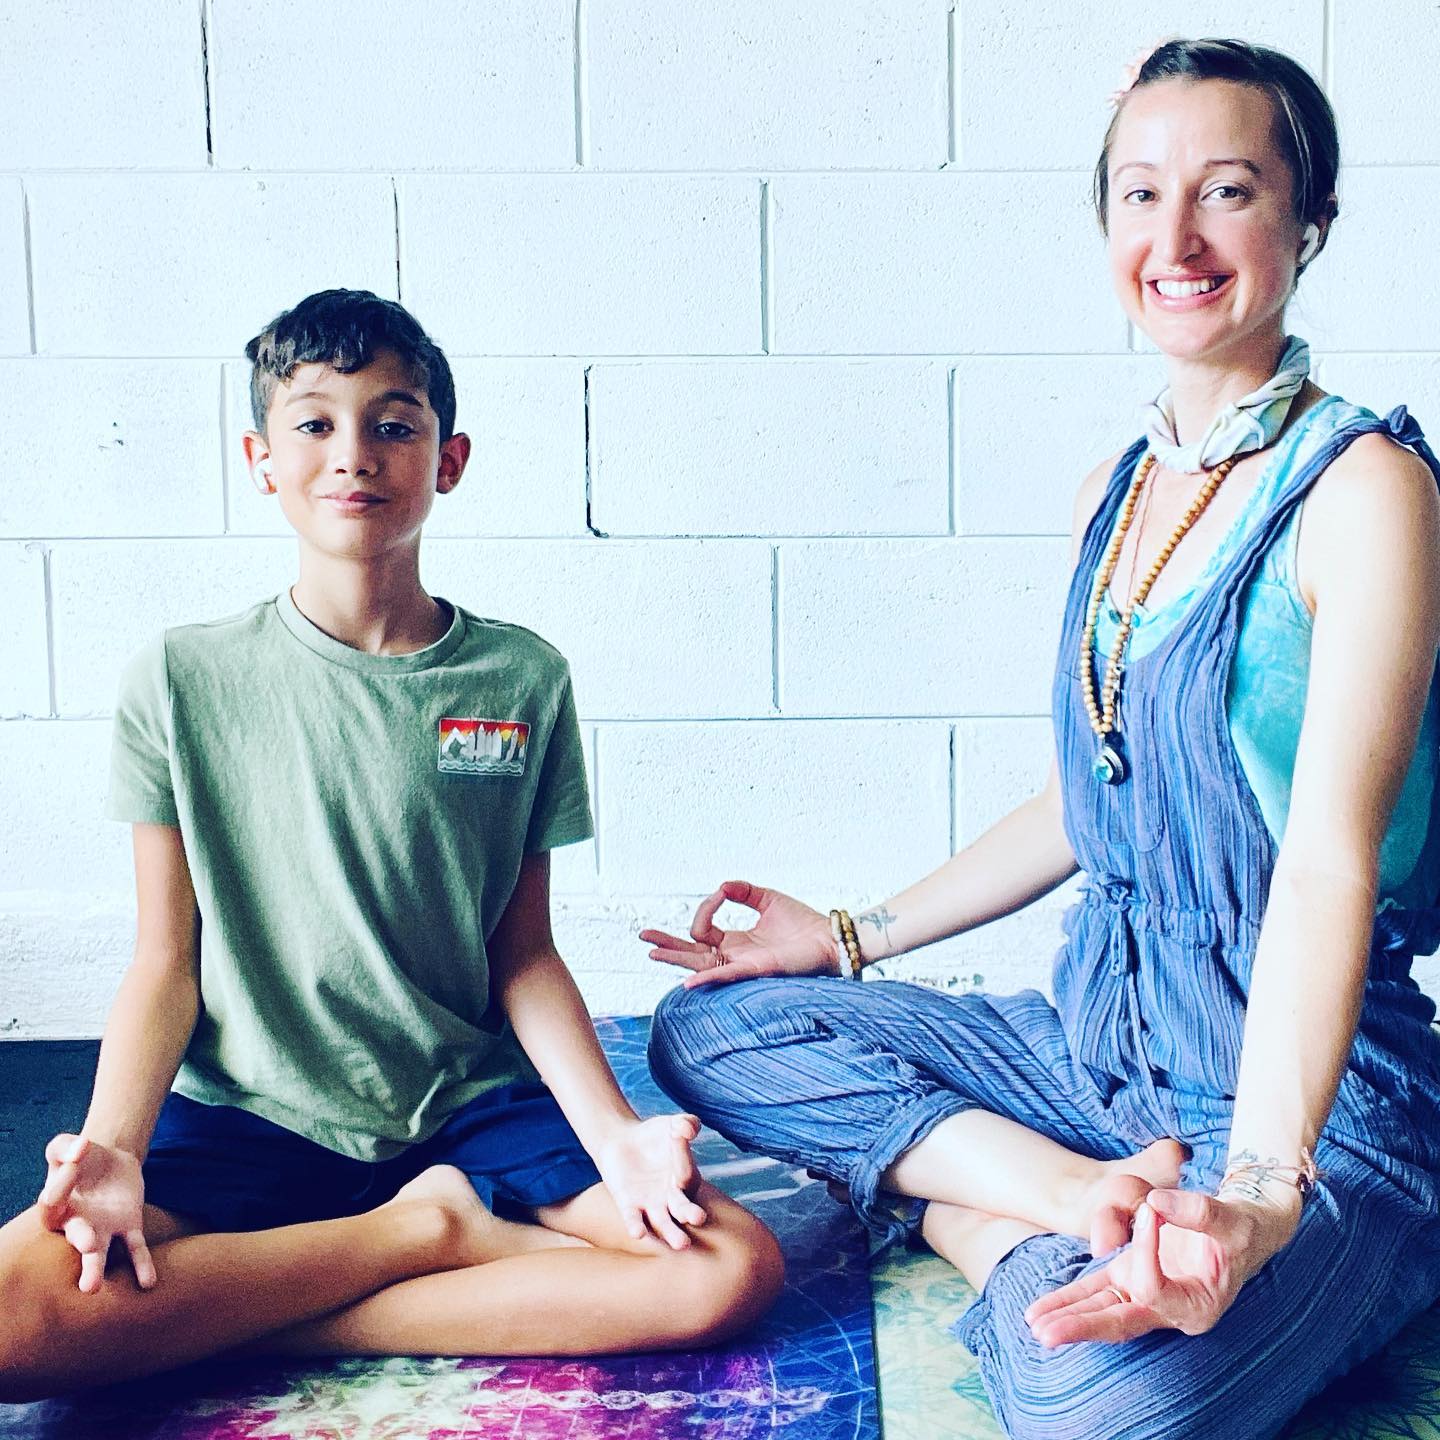 Yoga instructor with student.